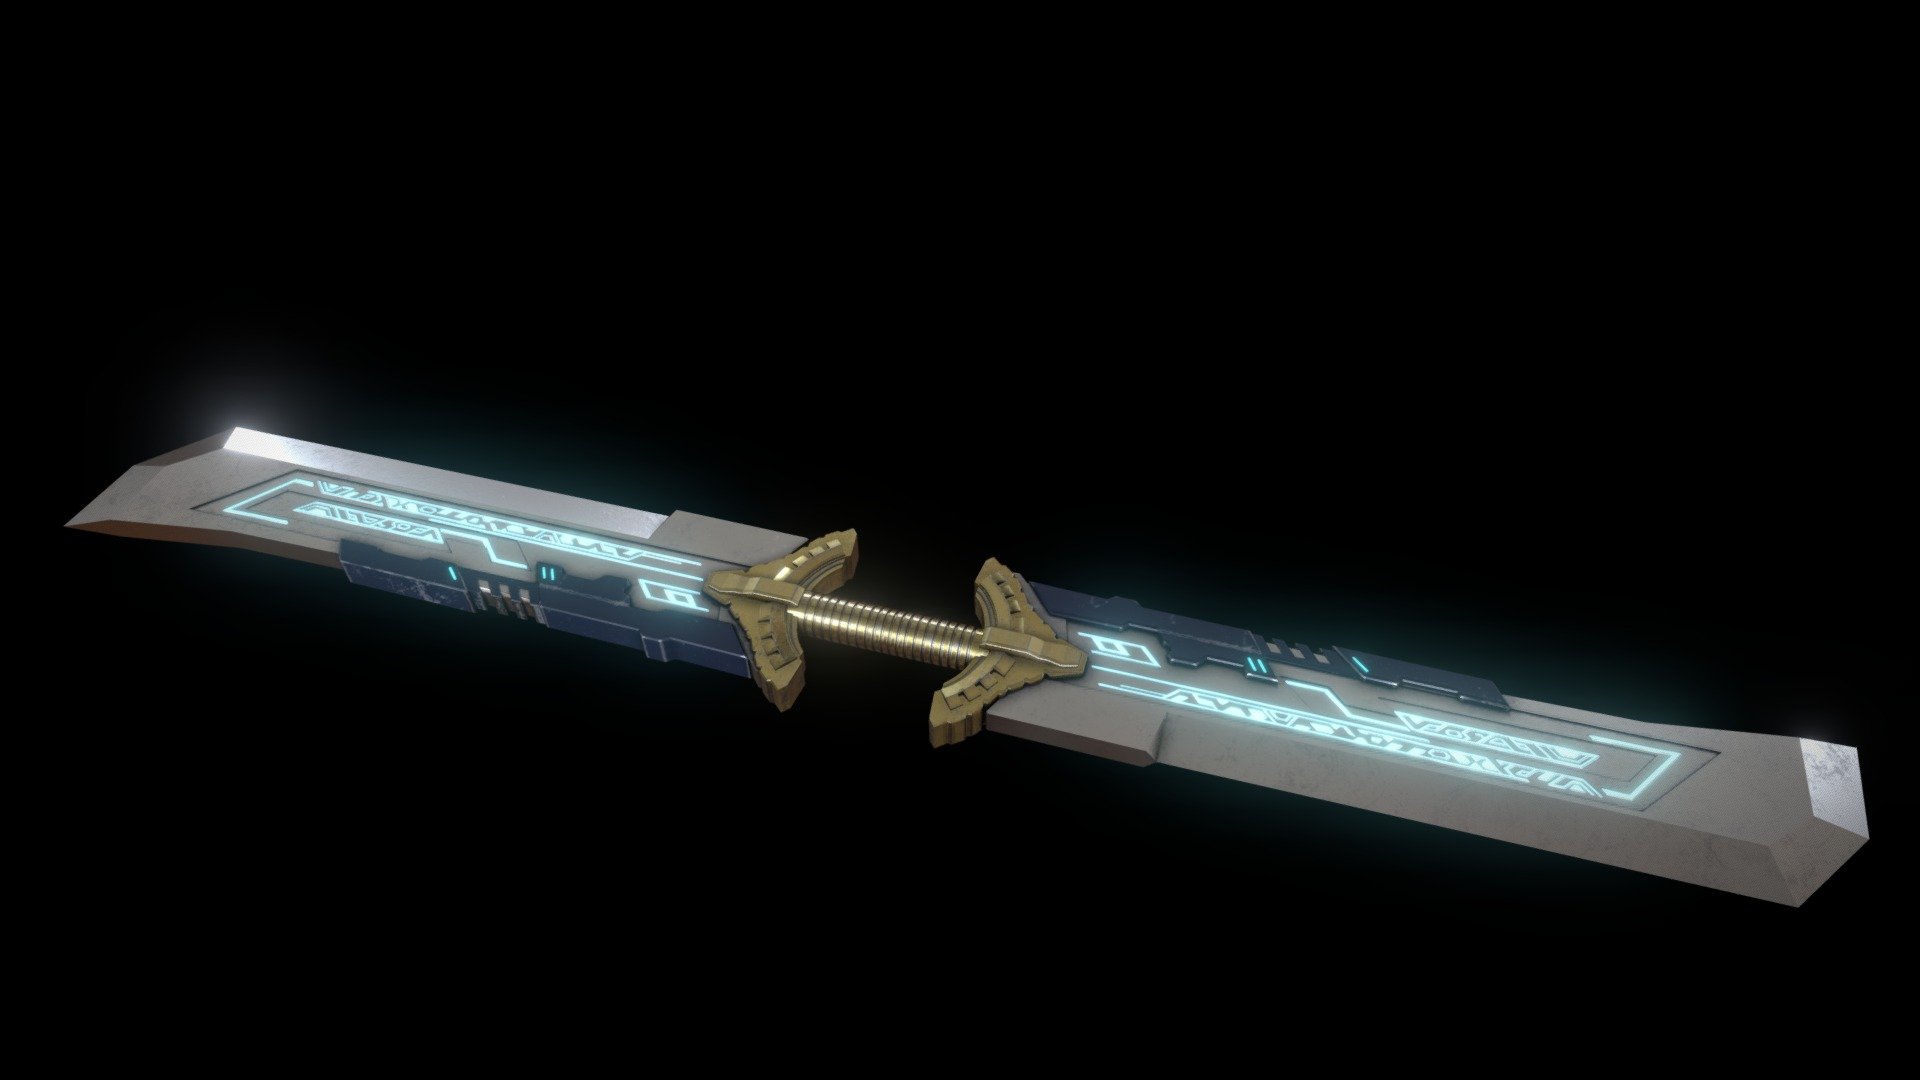 This My Second Artwork, it's thanos infinity sword (with little bit emission), I make in on blender 2.90, textured on substance painter 2019 and rendered in cycles and EEVEE render in blender 2.91. there are 9.1k Tris and 4.6k verts, thanks for view, don't forget to like and comment, see you in the next artwork - Thanos Infinity sword (With Emission) - Download Free 3D model by ikhlasfathoni 3d model